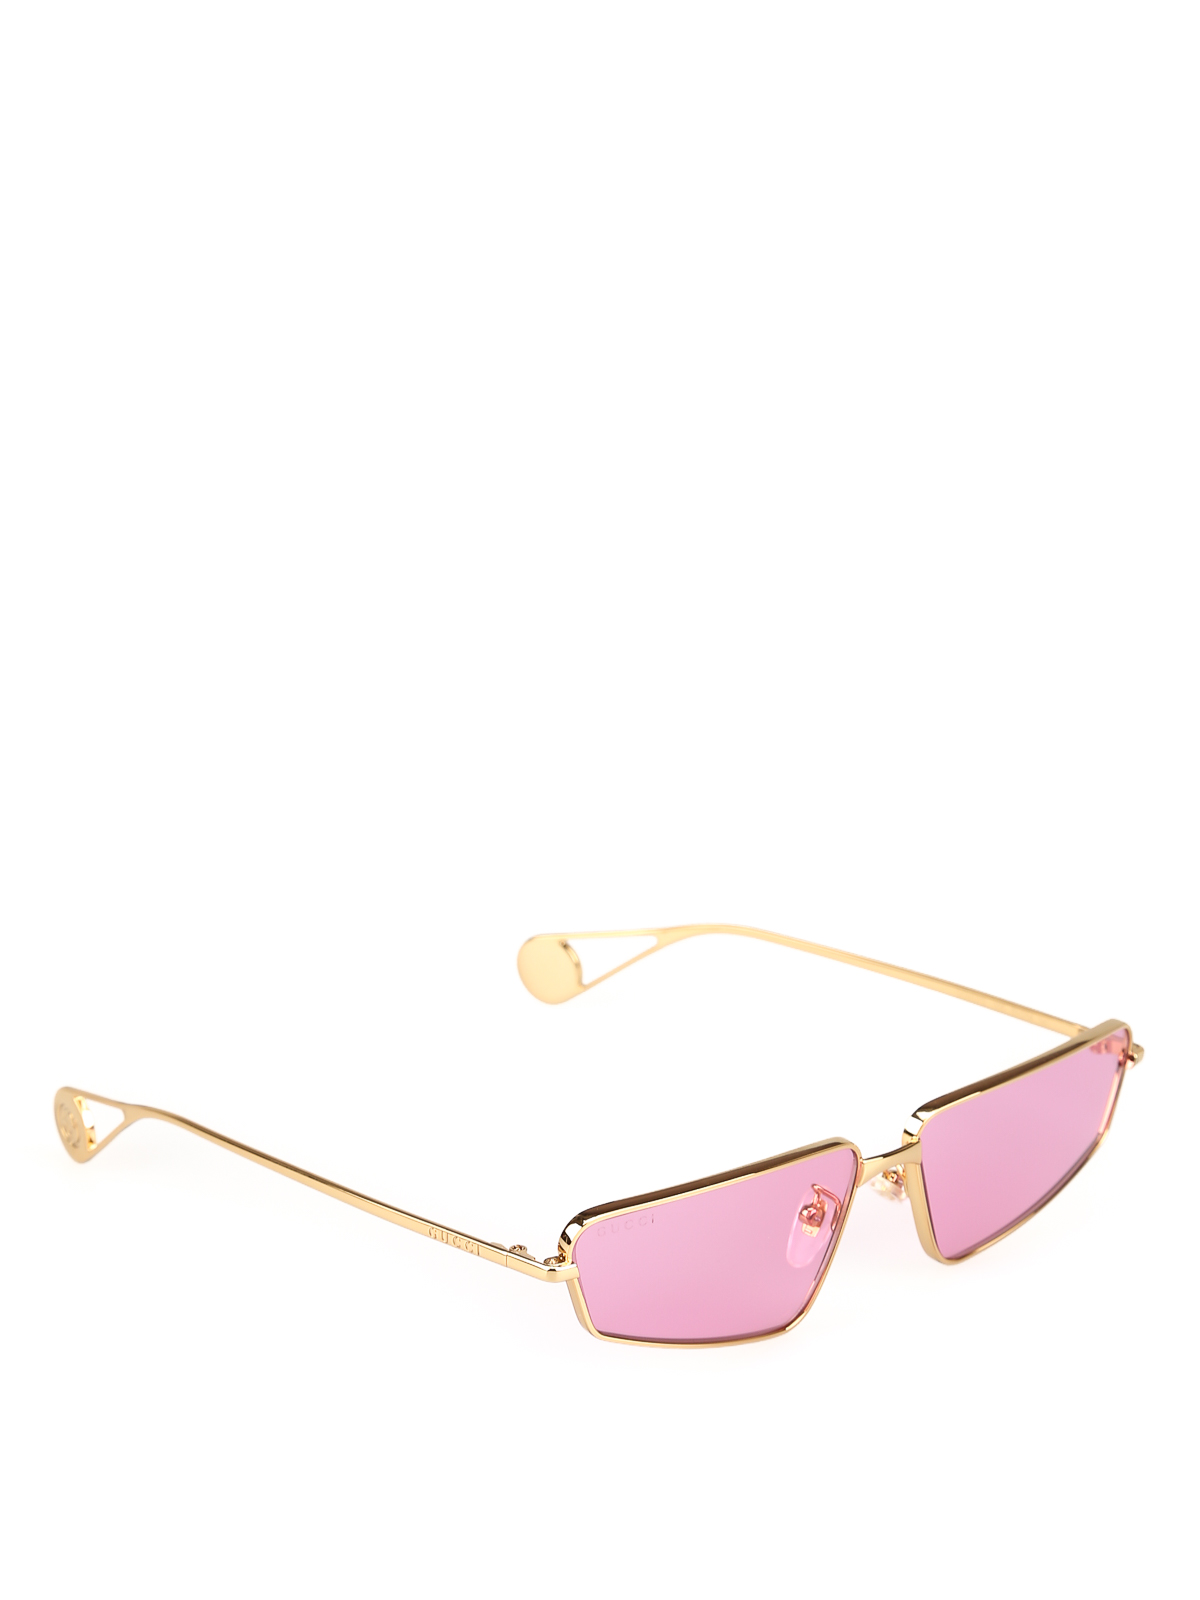 pink and gold gucci sunglasses